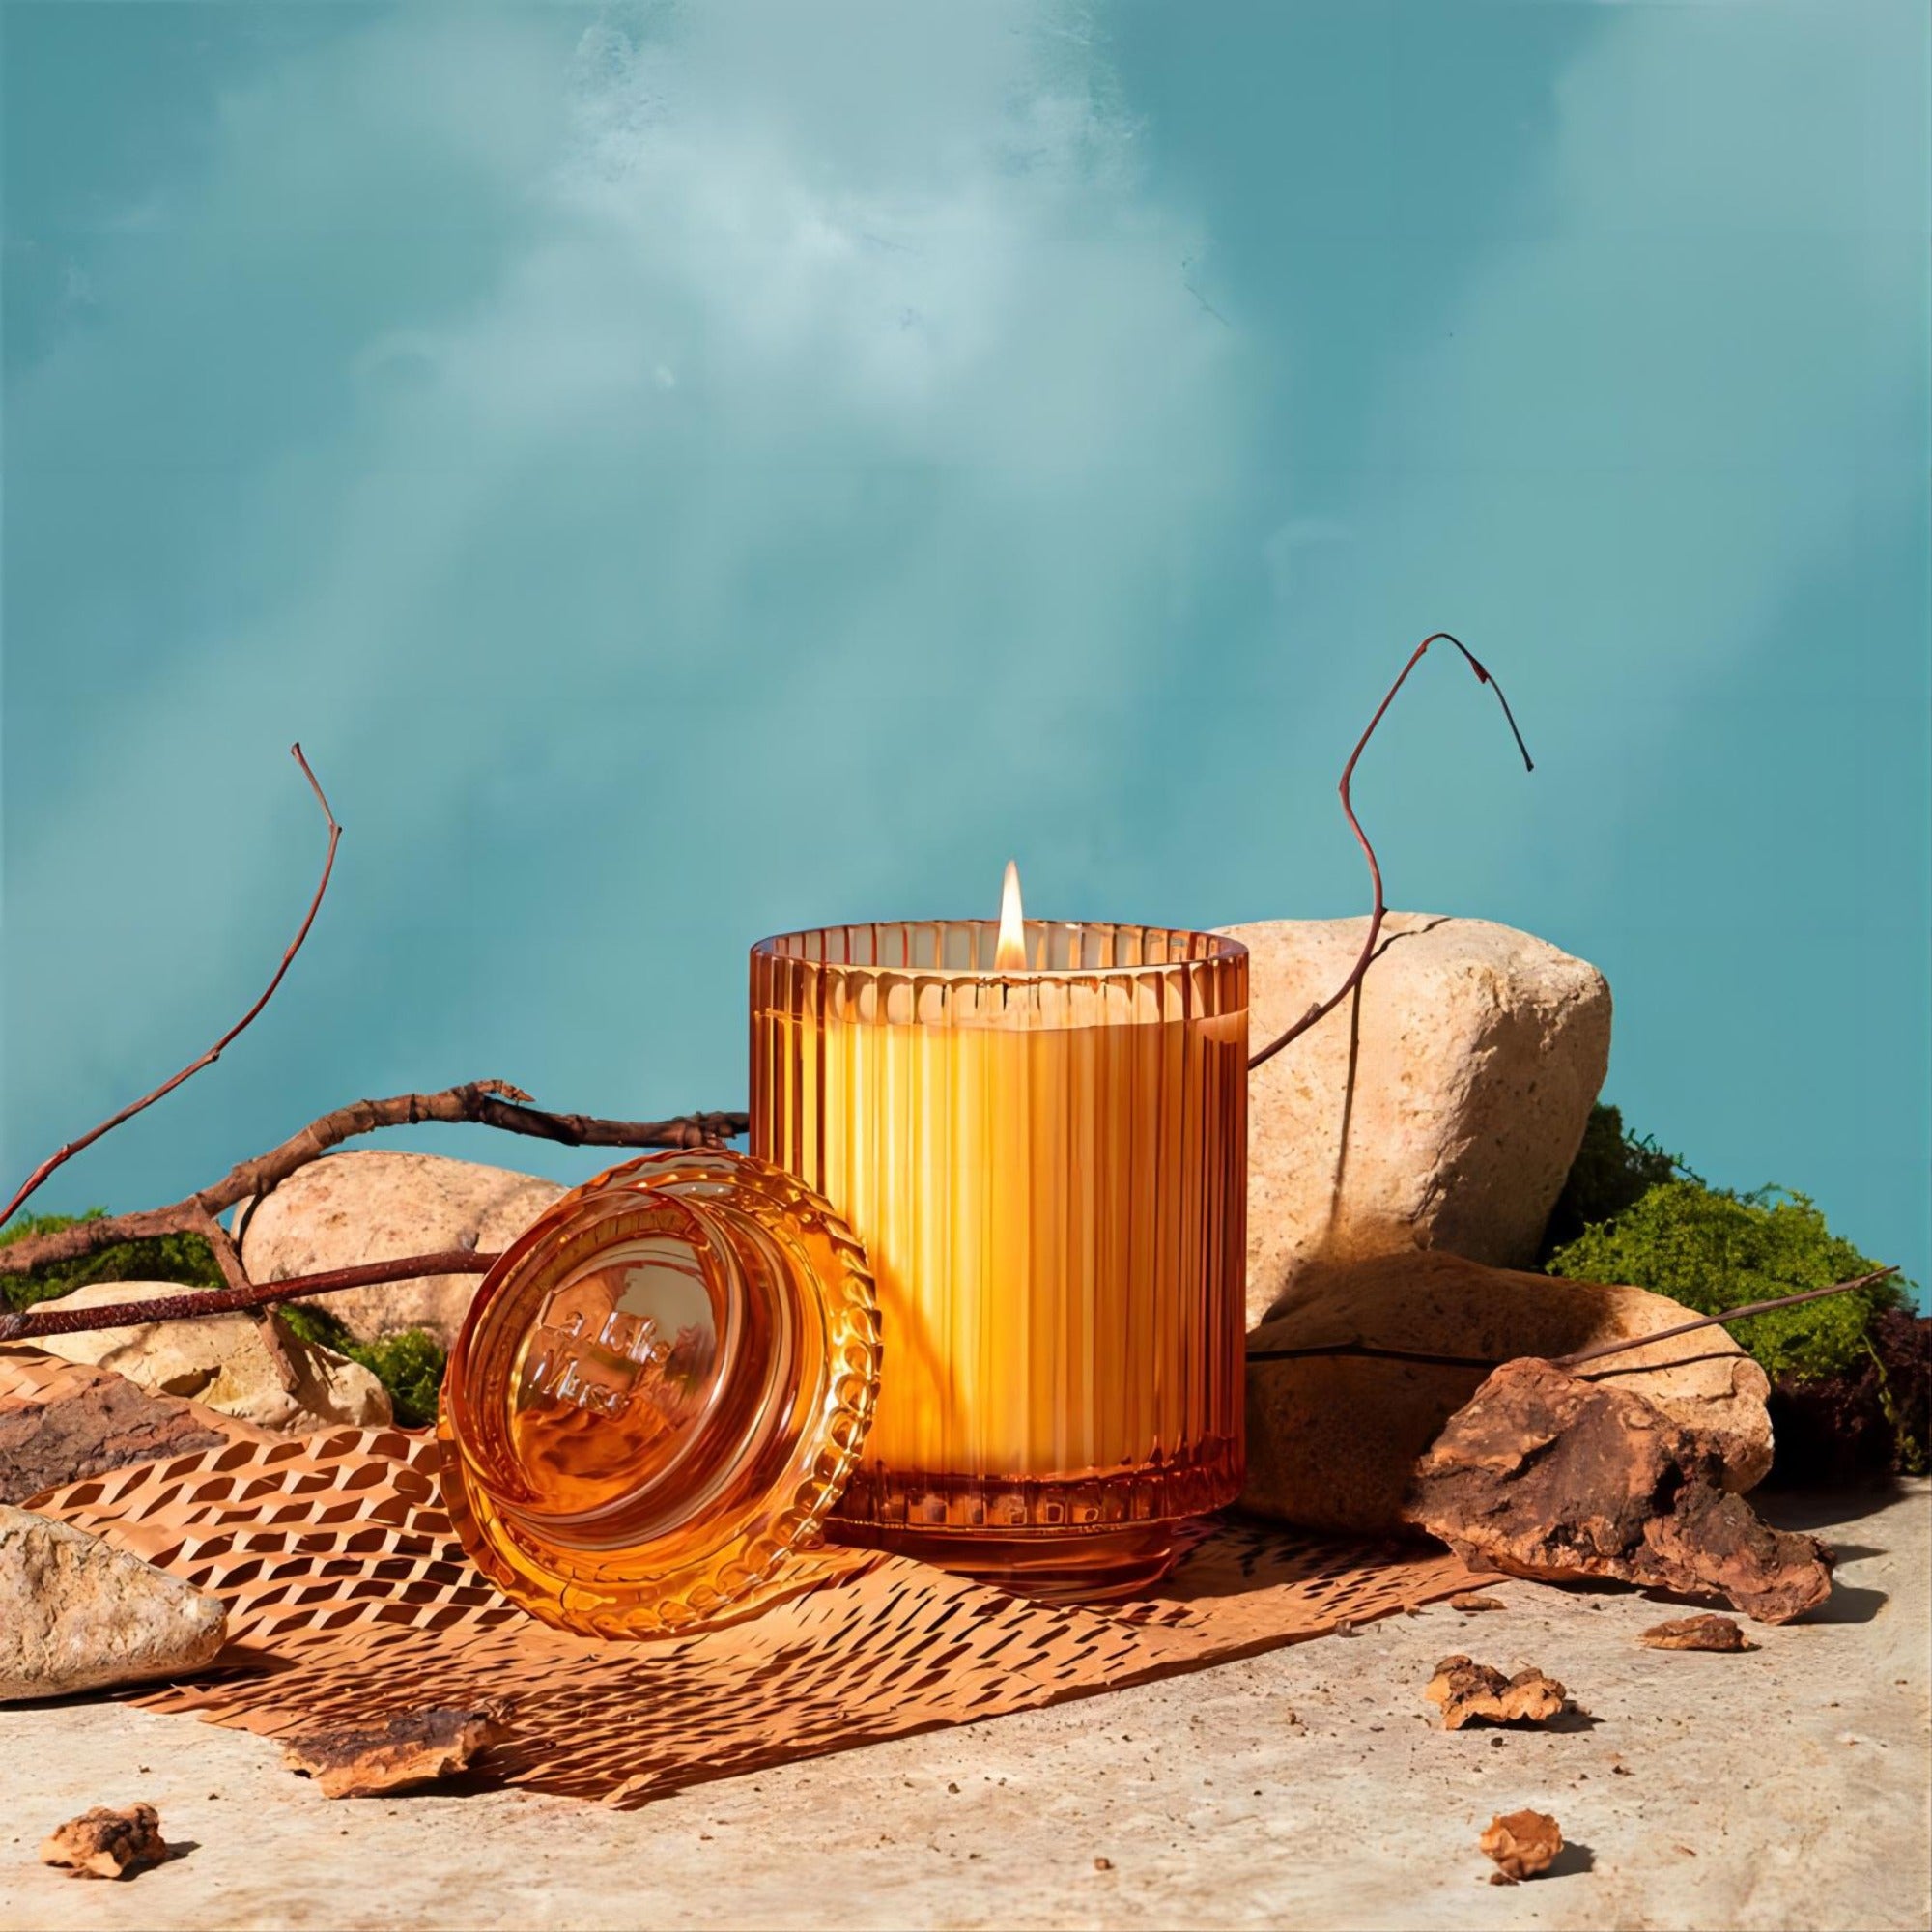 Editorial Shot of a lit Amélie - Sandalwood & Patchouli candle at the center, surrounded by stones, grass, and branches.